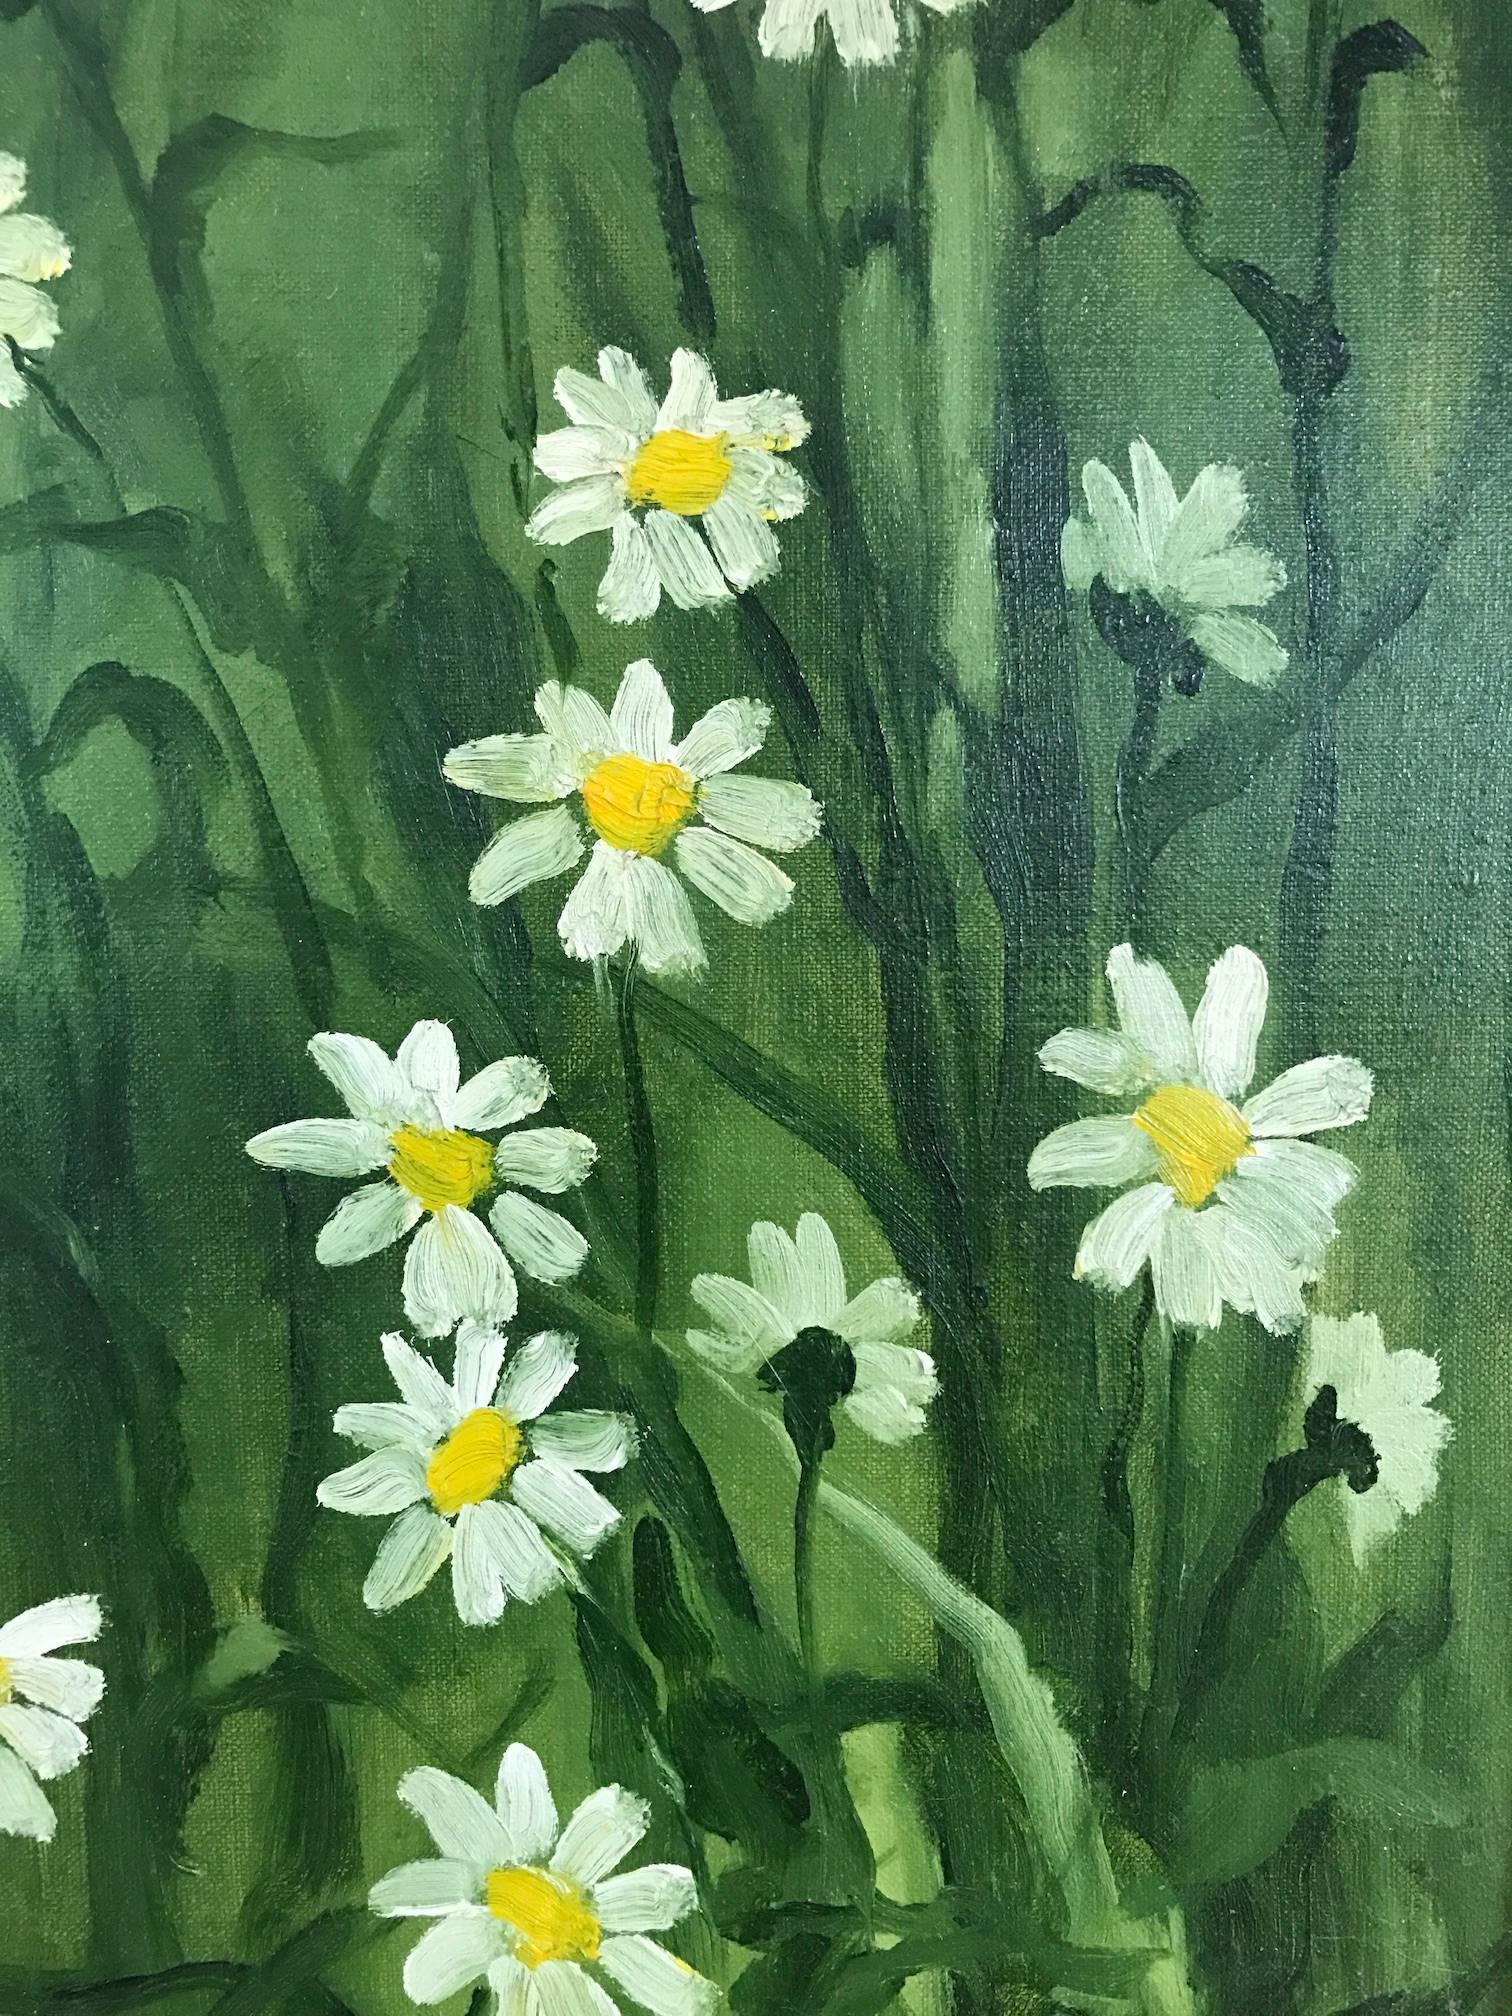 Texas Still Life Flower Painting of Daisies 1